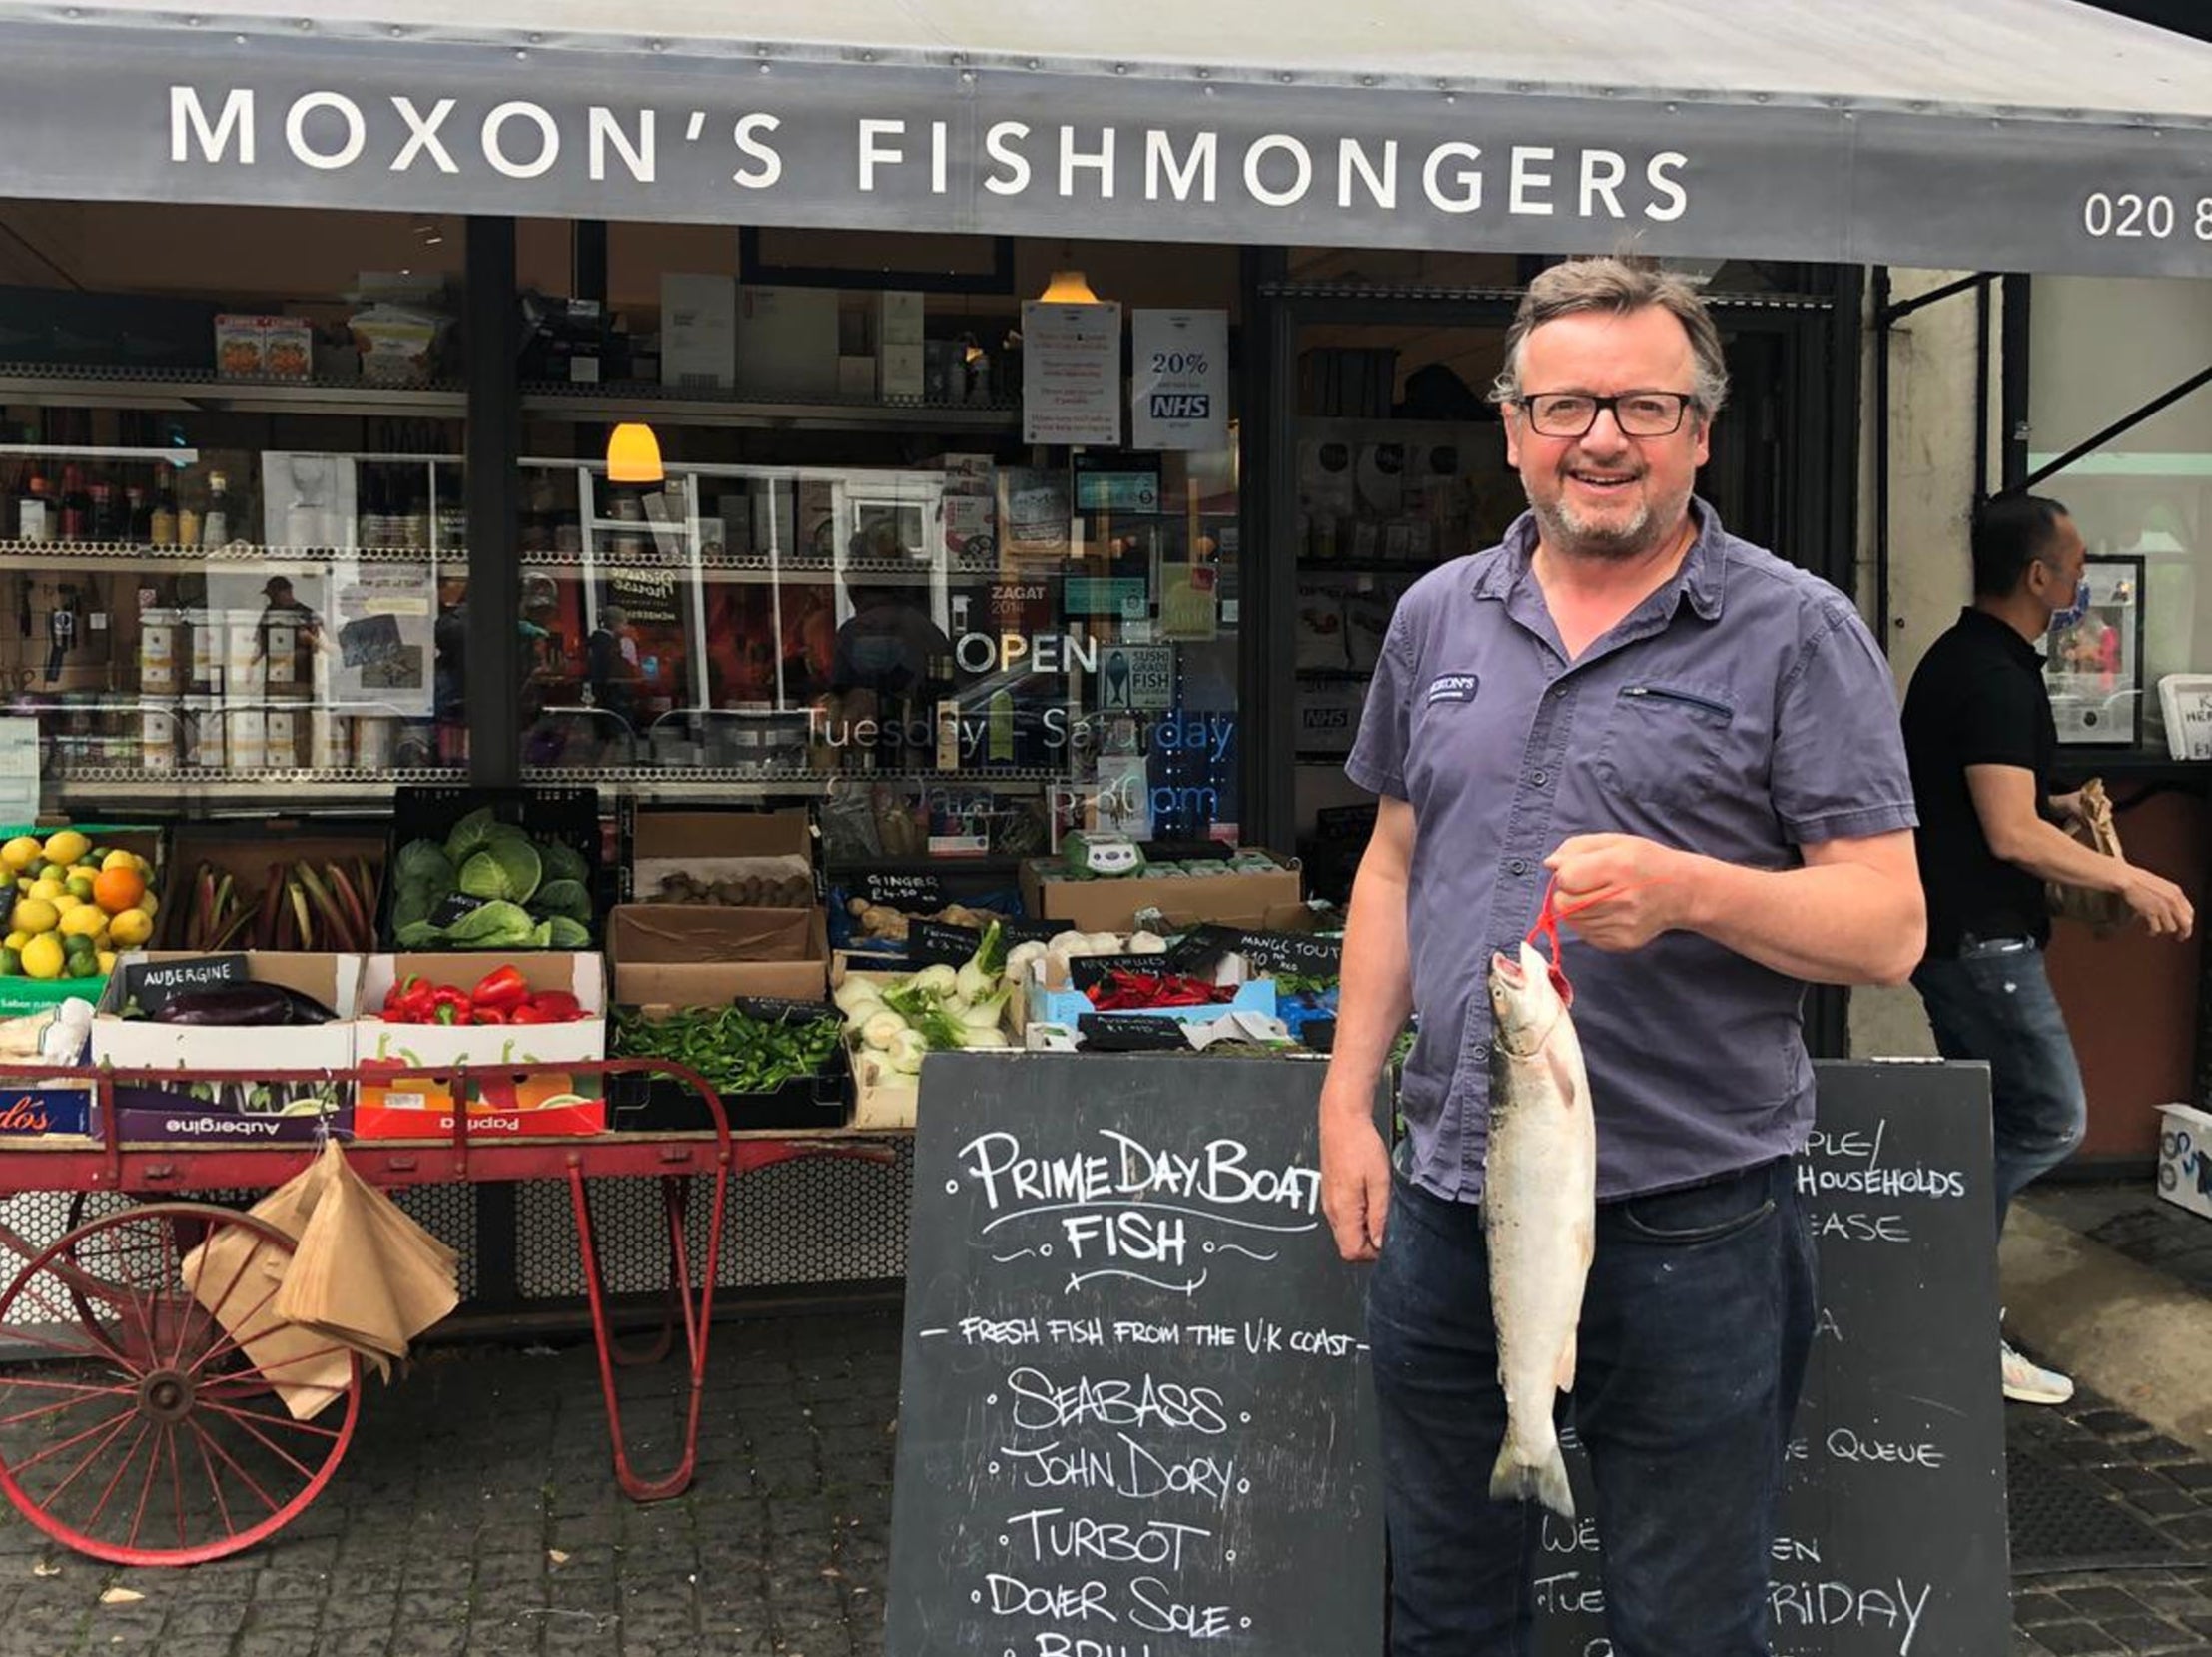 Robin Moxon stands outside one of his fishmongers advertising prime day boat fish